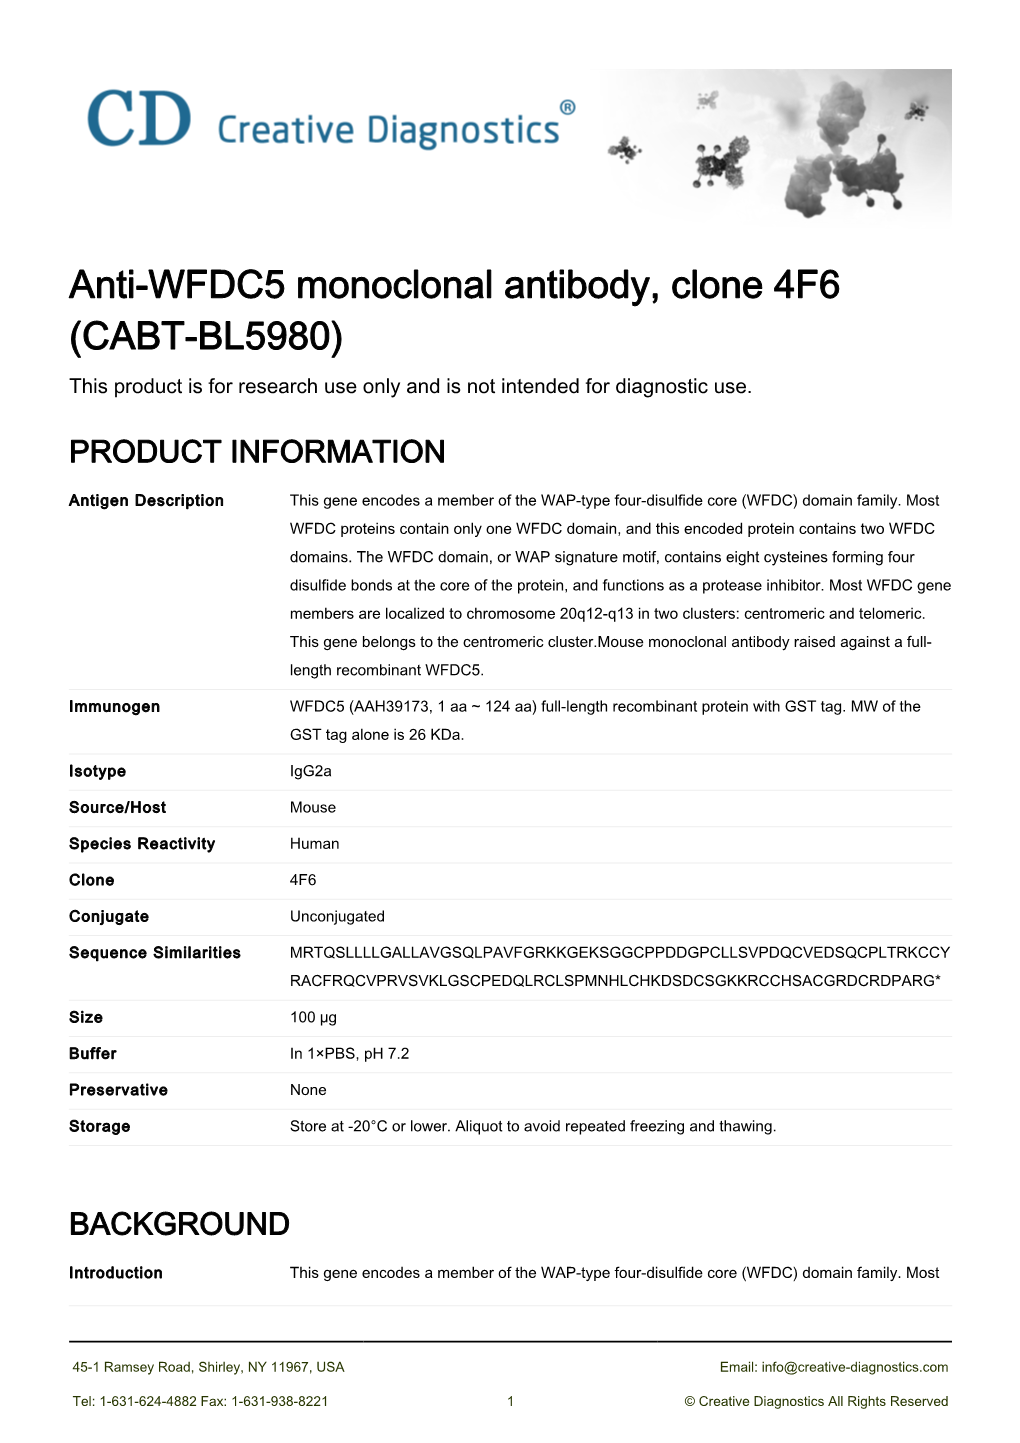 Anti-WFDC5 Monoclonal Antibody, Clone 4F6 (CABT-BL5980) This Product Is for Research Use Only and Is Not Intended for Diagnostic Use